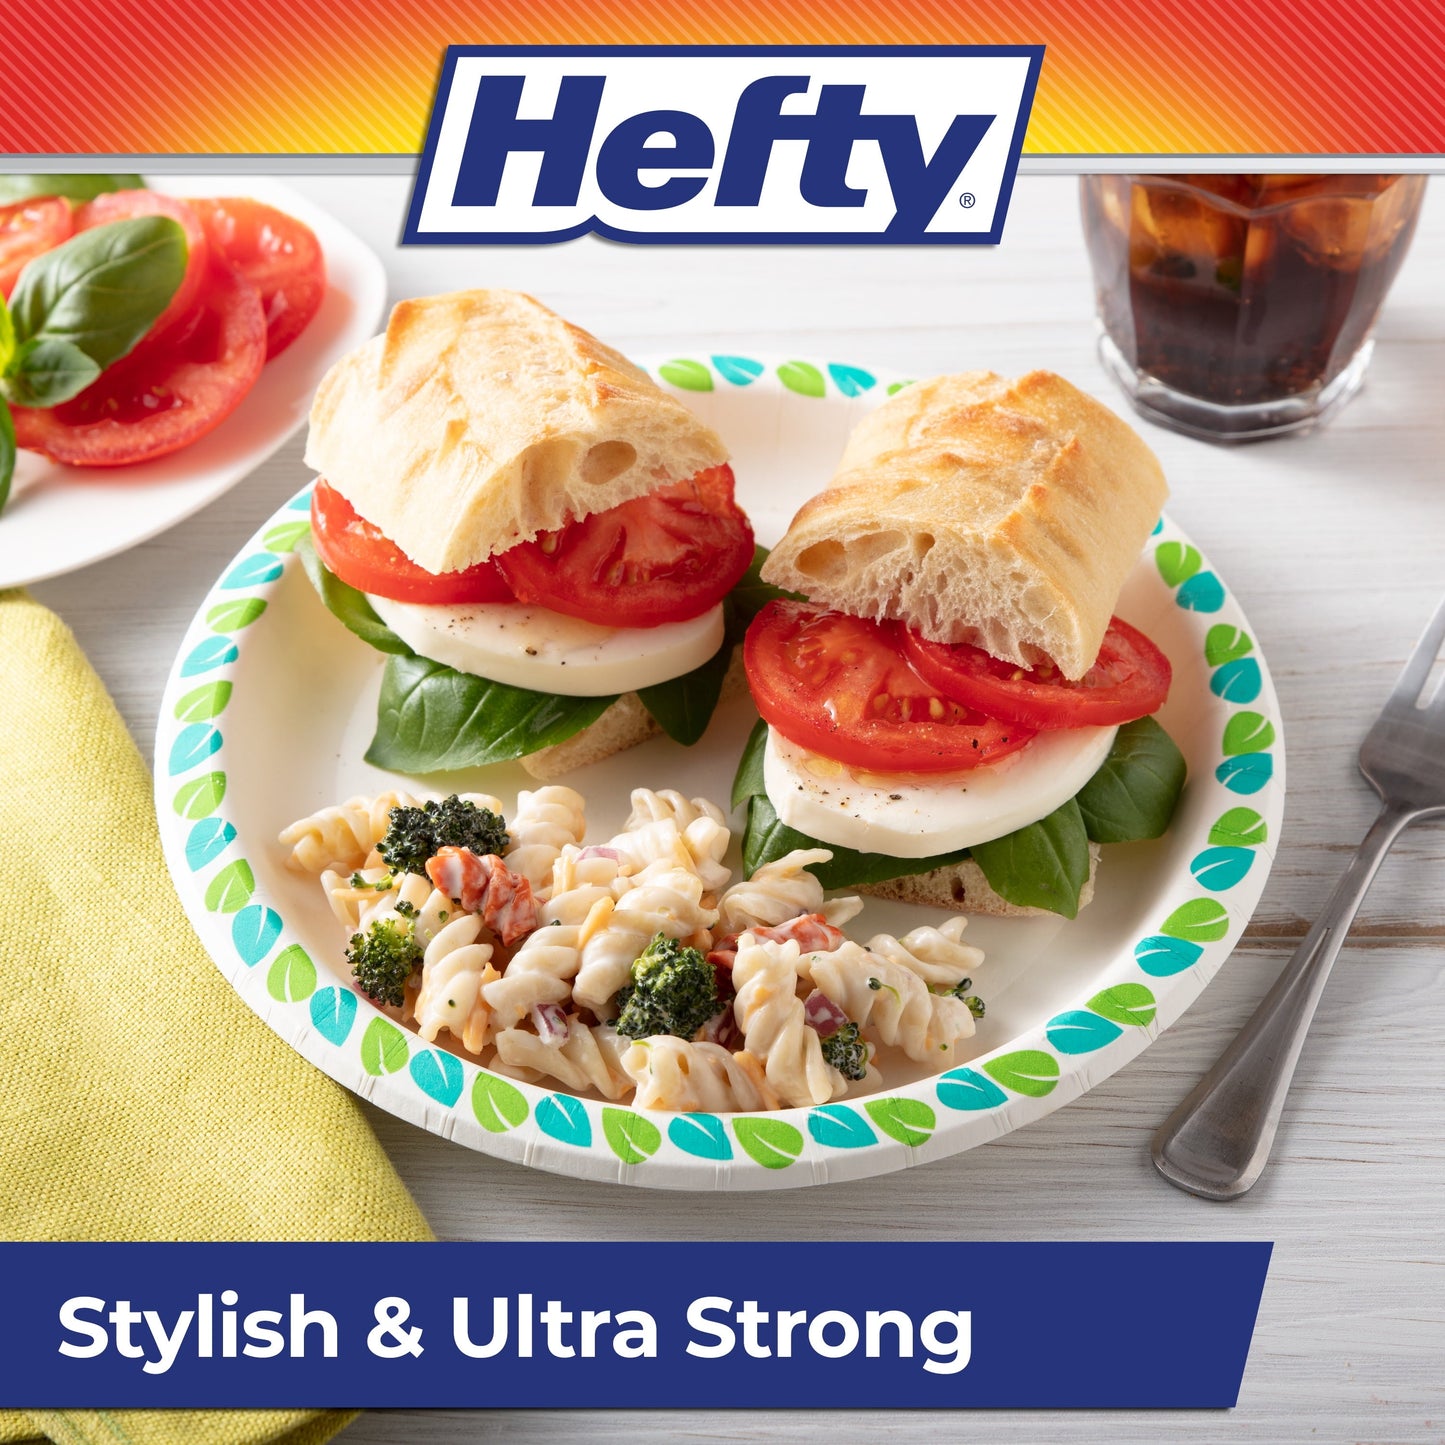 Hefty Compostable Printed Paper Plates, 8.6 inch, 20 Count